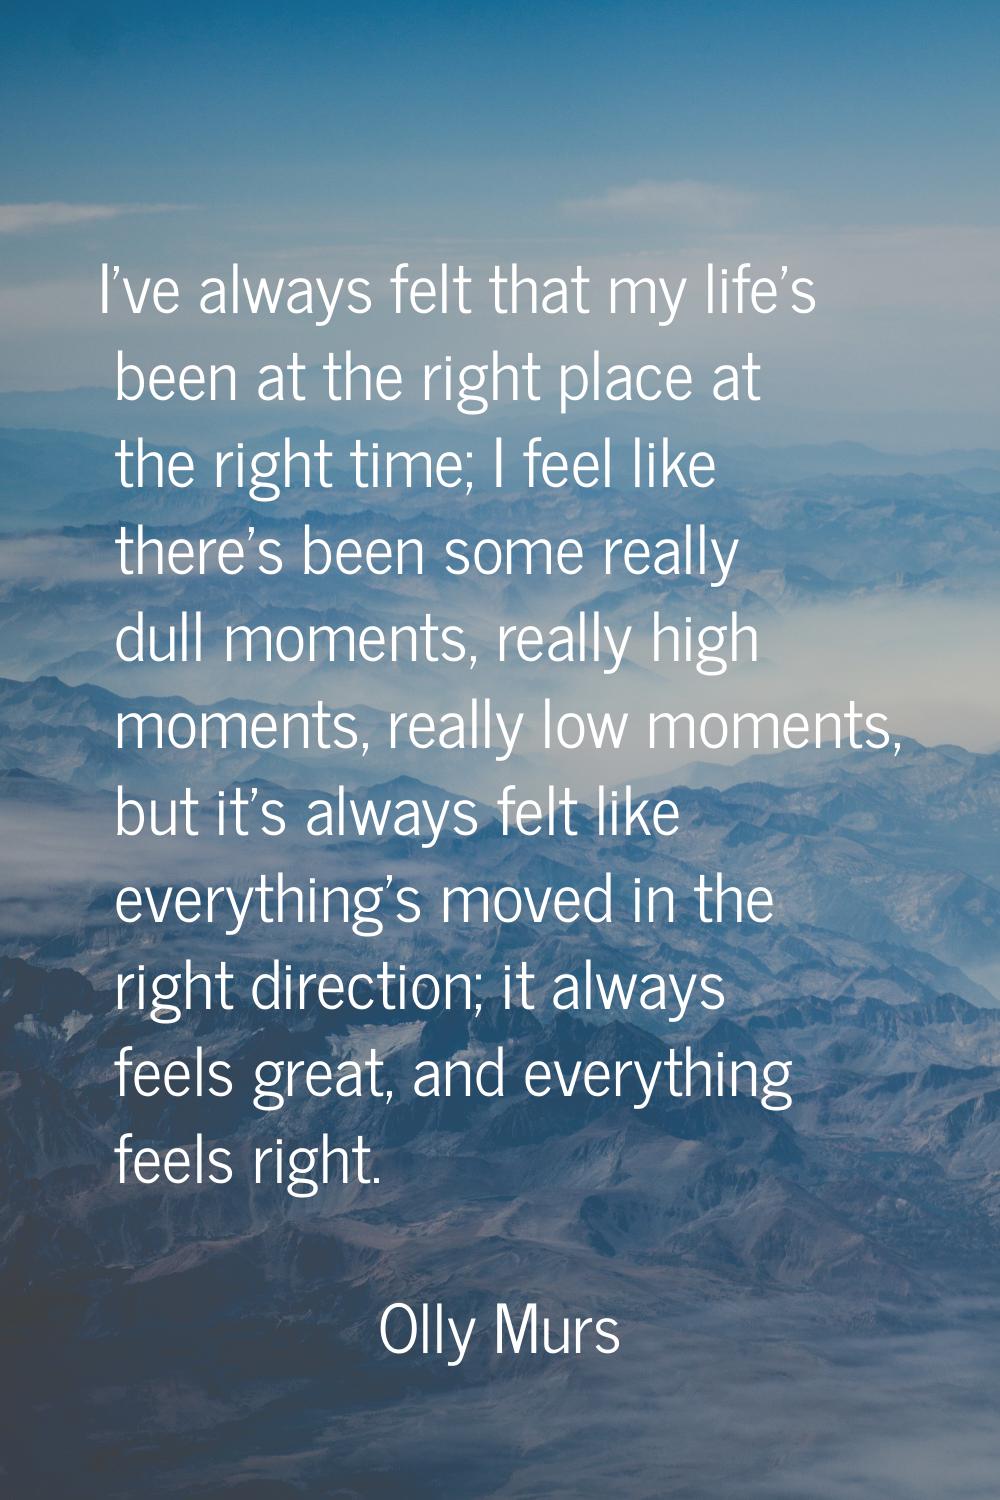 I've always felt that my life's been at the right place at the right time; I feel like there's been